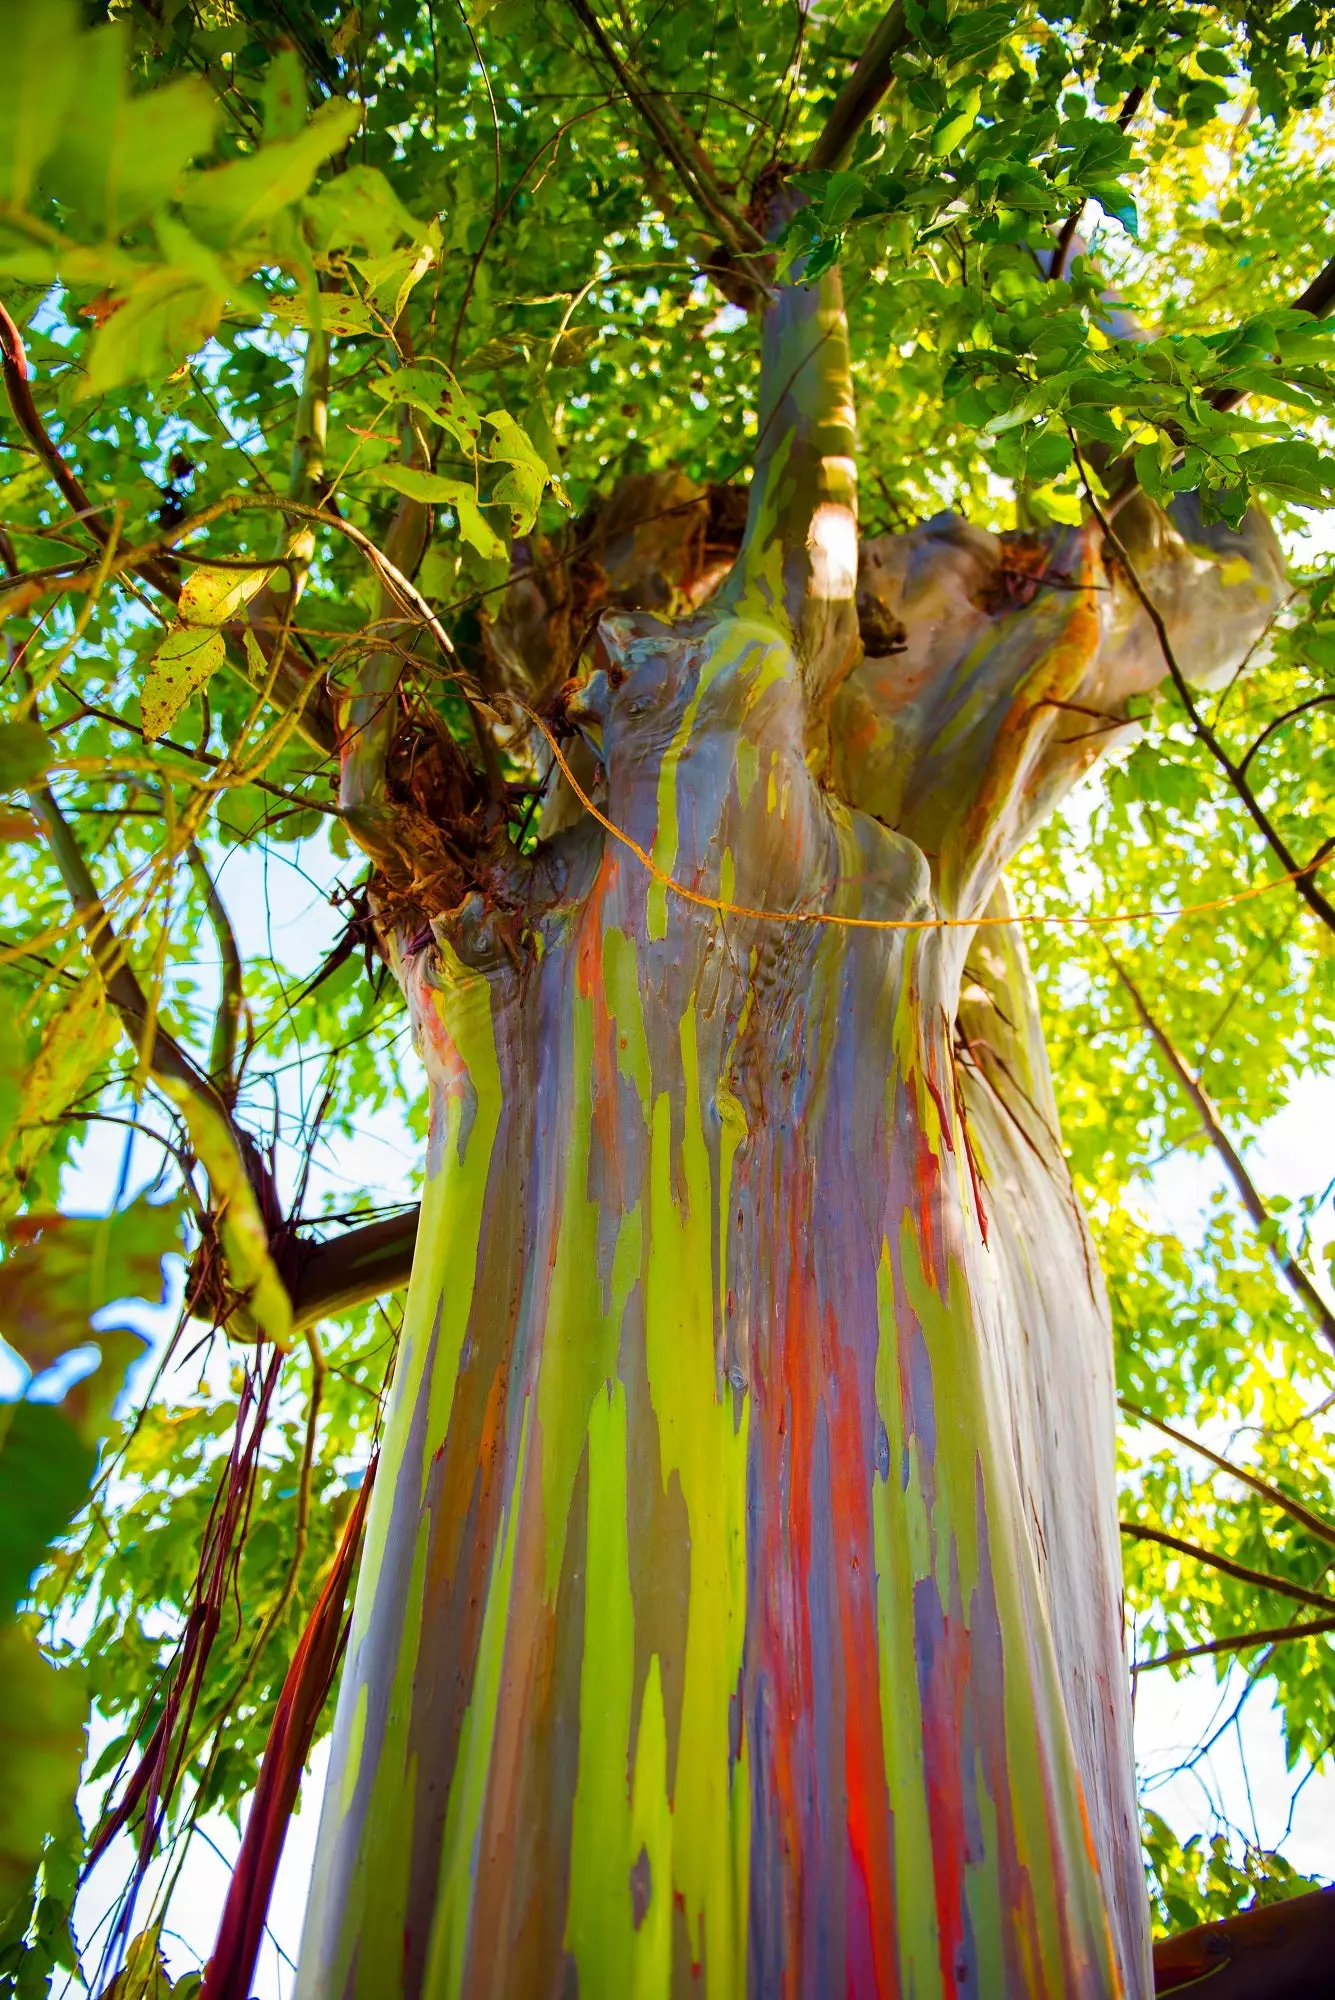 Rainbow Eucalyptus Trees for Sale   Buying & Growing Guide   Trees.com